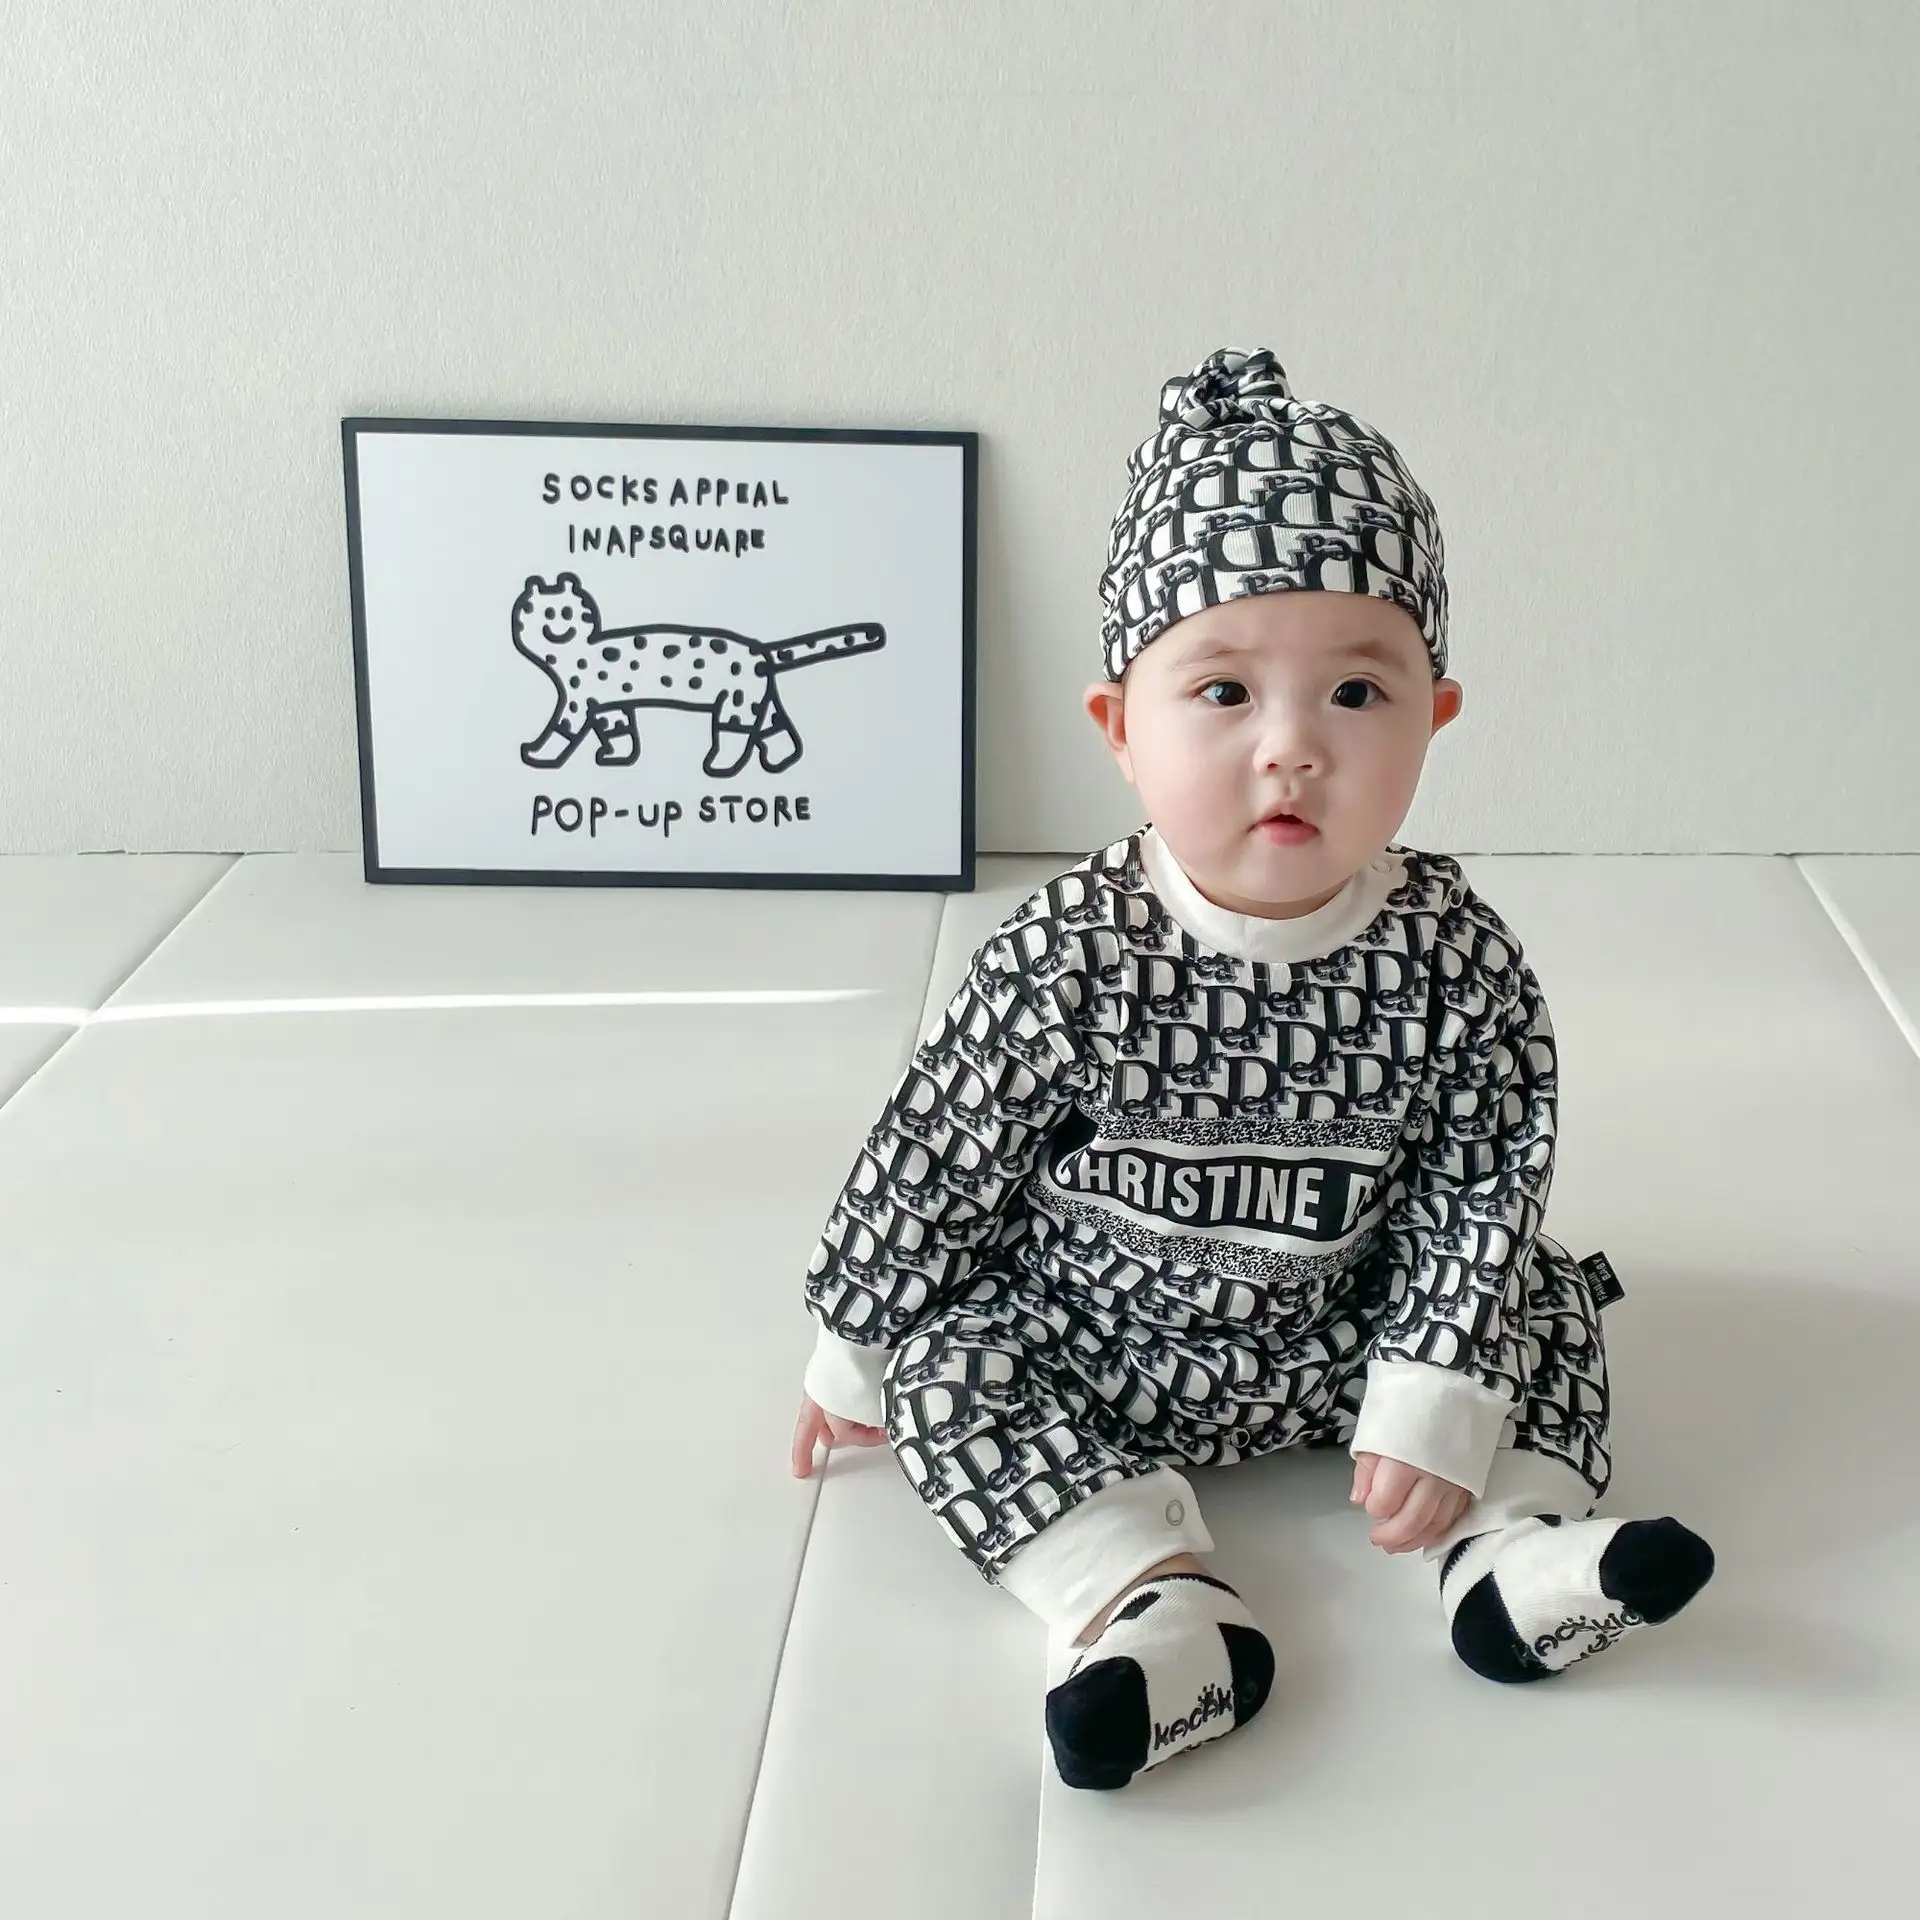 2022 Autumn Boutique baby clothes 100% organic Cotton Long Sleeve printed bodysuits newborn baby romper infants boys jumpsuits